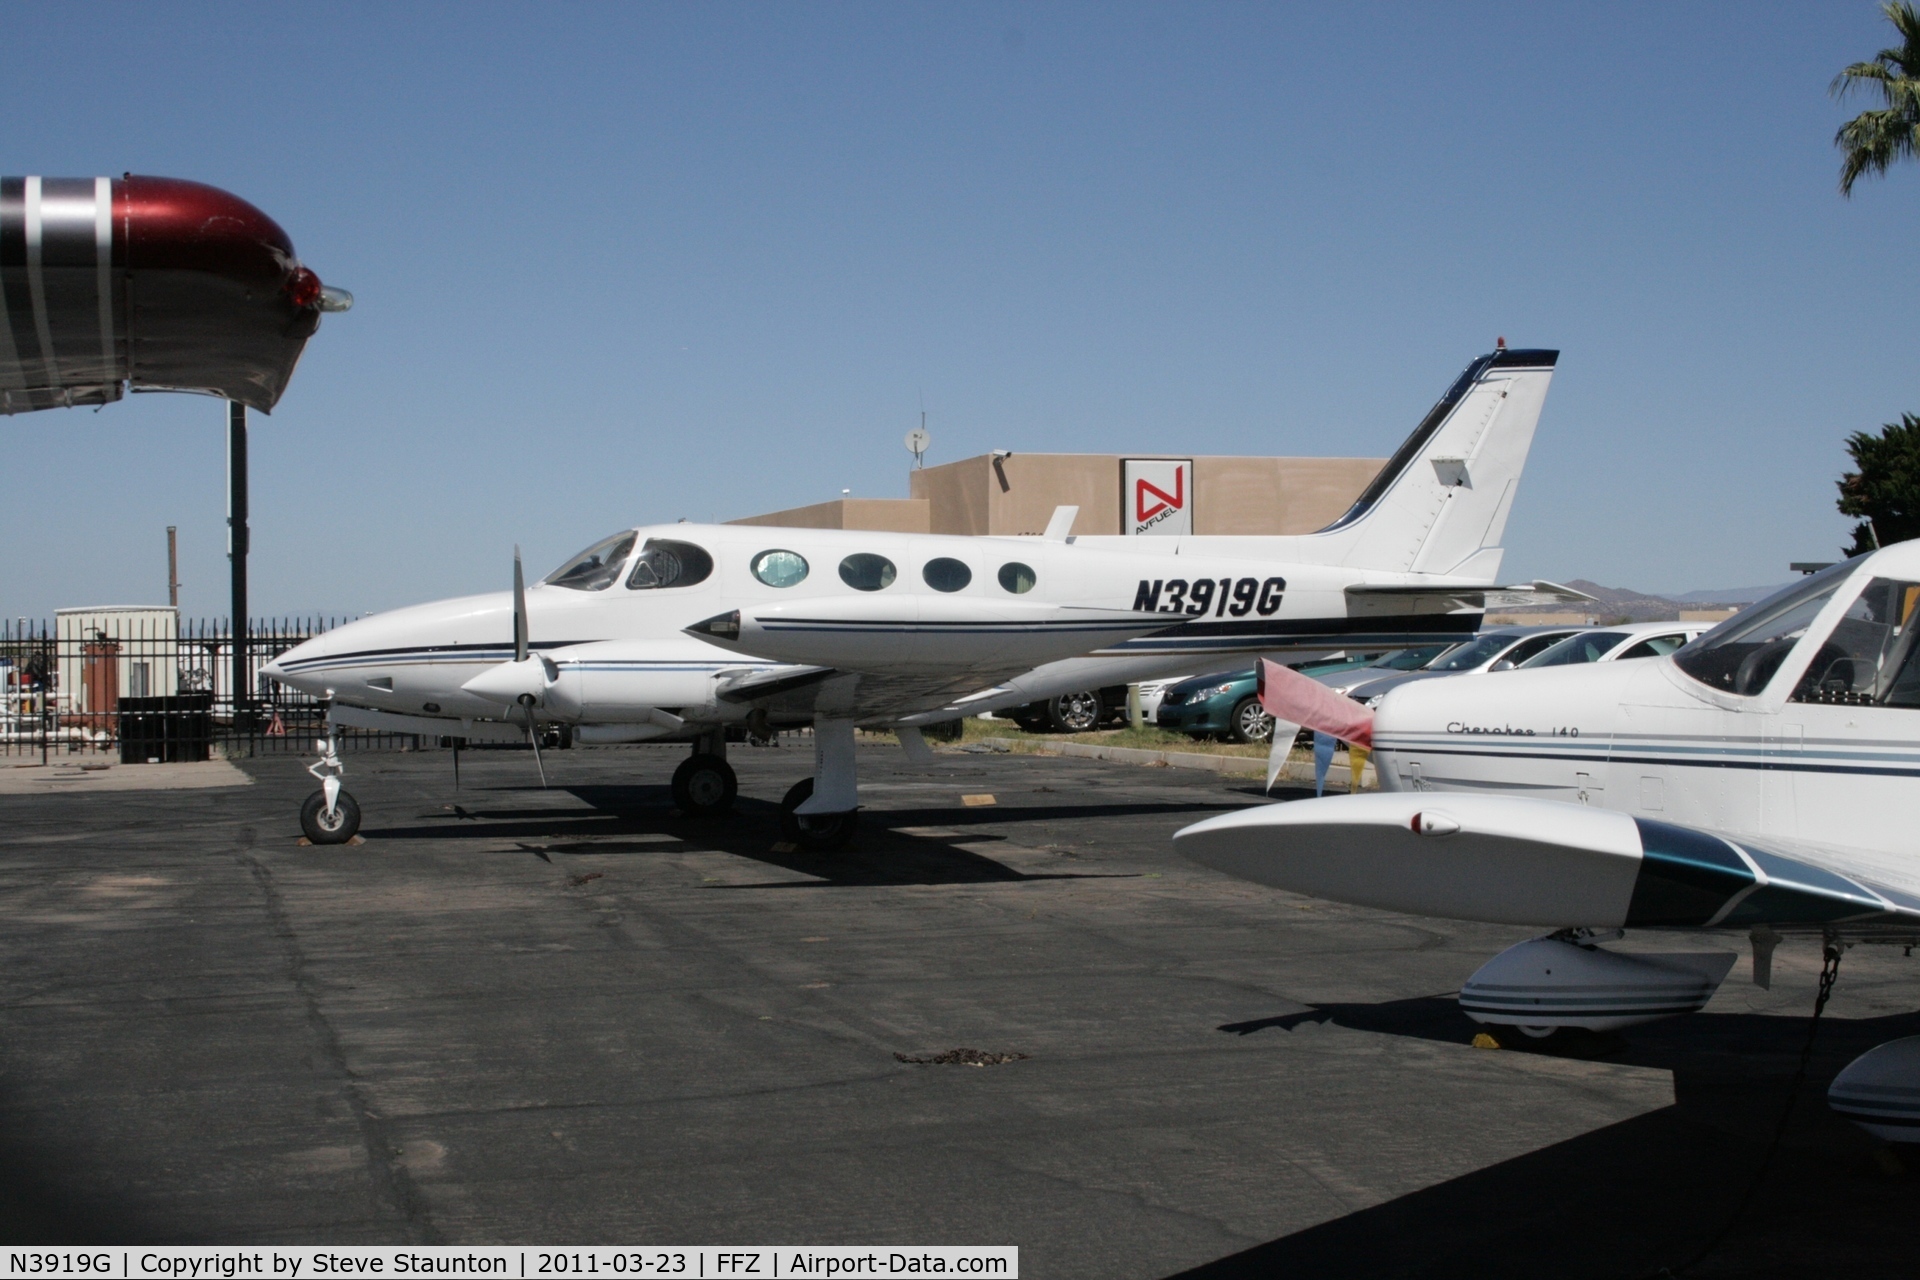 N3919G, Cessna 340A C/N 340A0234, Taken at Falcon Field Airport, in March 2011 whilst on an Aeroprint Aviation tour